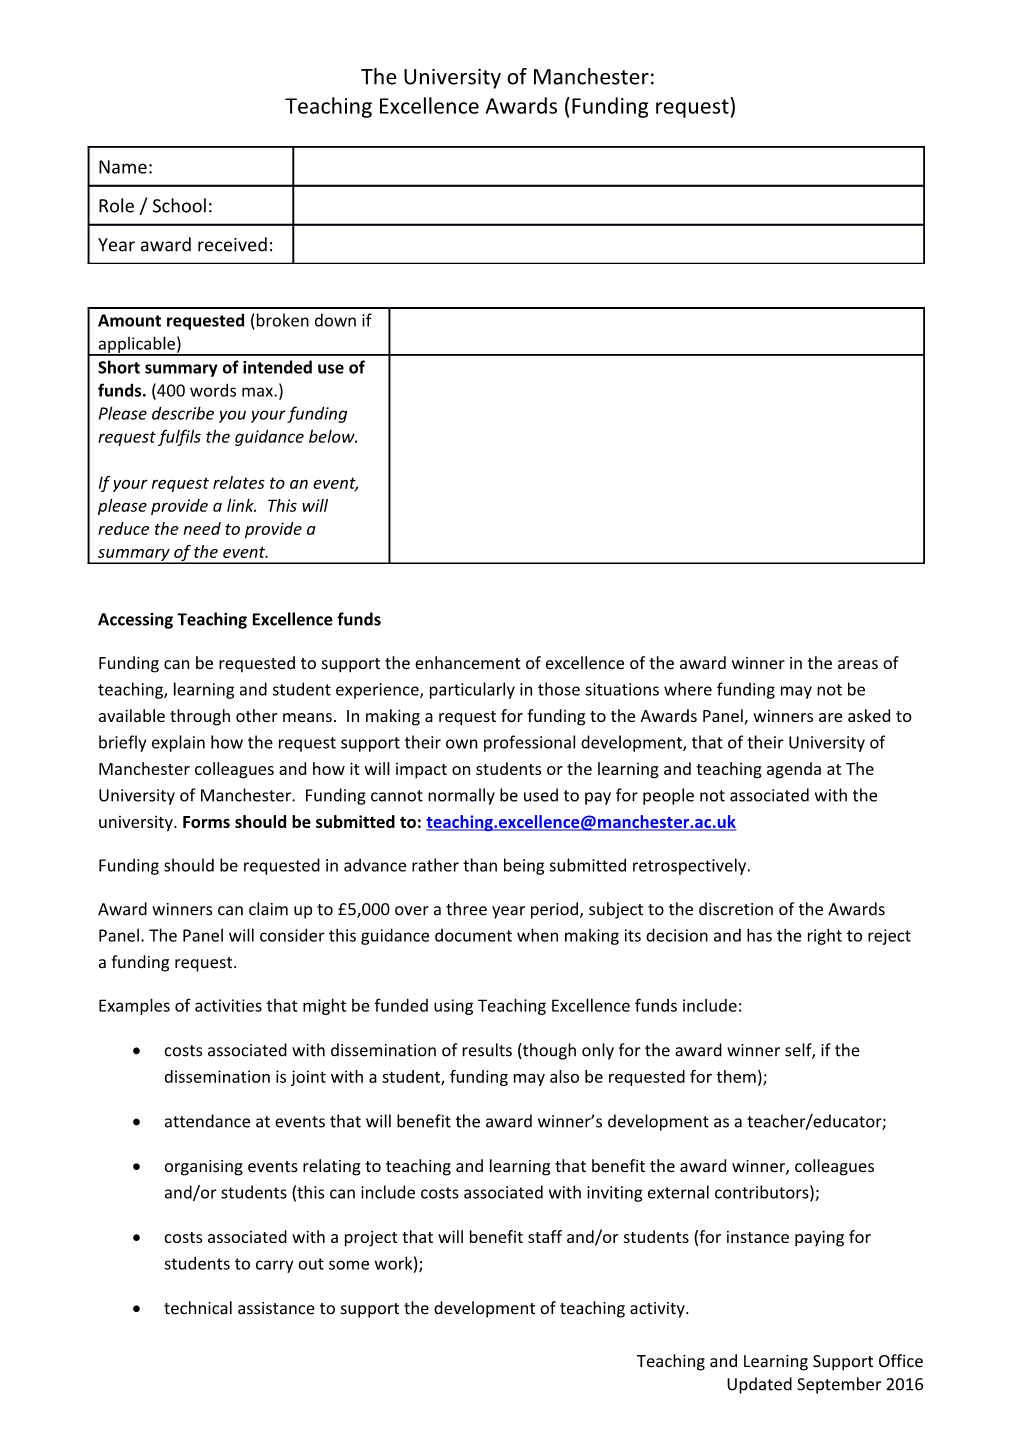 Teaching Excellence Awards (Funding Request)